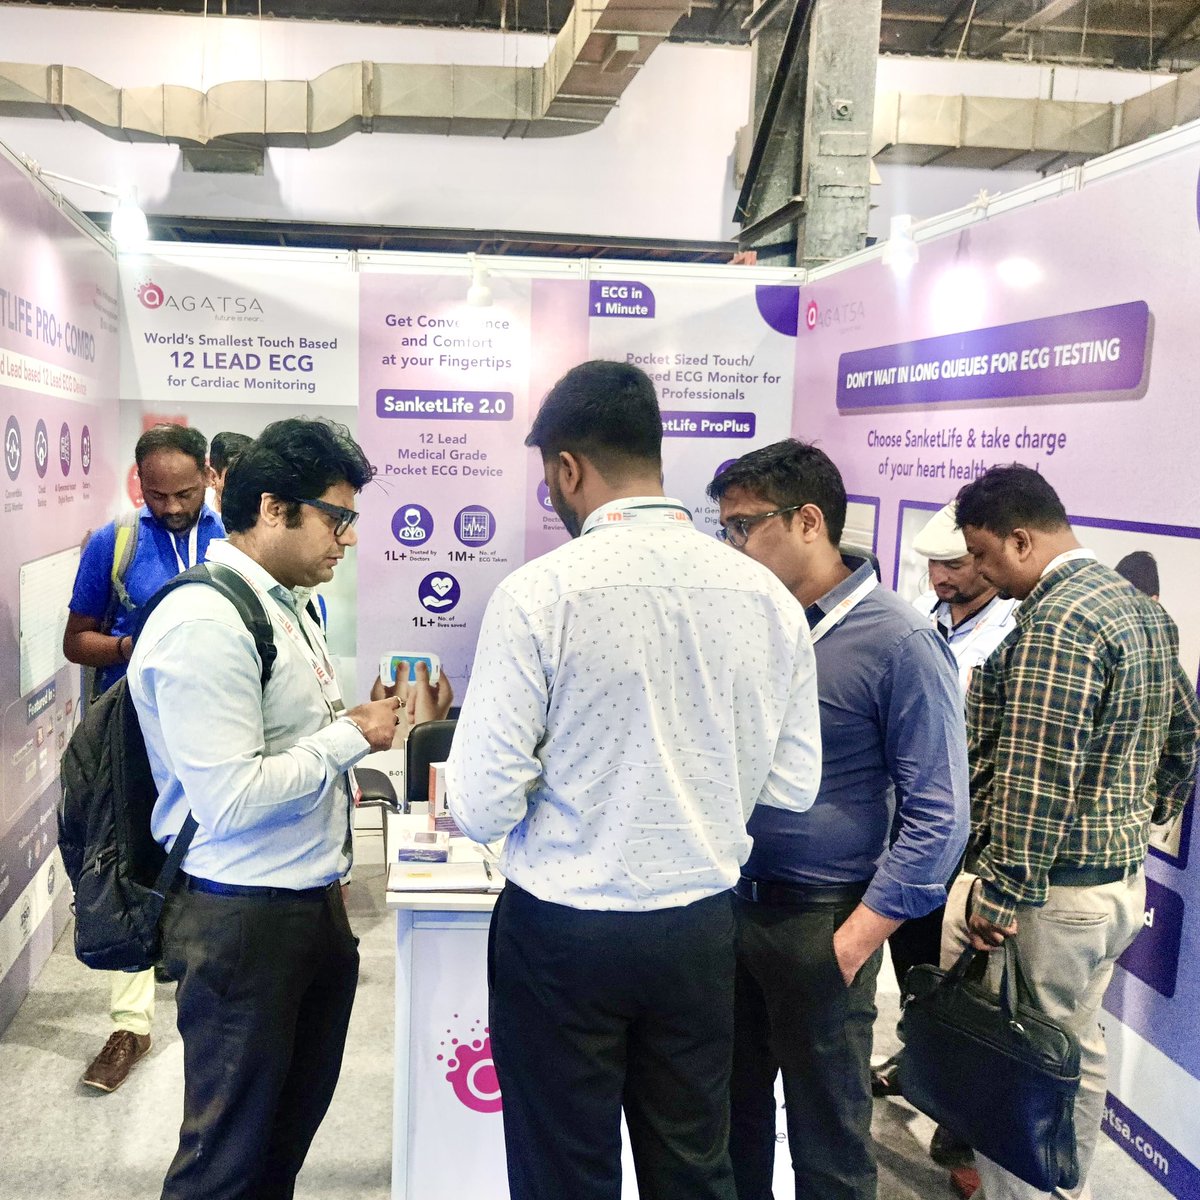 Day 1 dazzled with Mumbai's enthusiasm at the 29th International Conference & Medical Fair AIMED! We had witnessed so many people’s curiosity about SanketLife pocket ECG and were amazed by its 12 lead ECG innovative feature. @medical_fair @MiIAiMeD @FTR4H #exhibition #agatsa